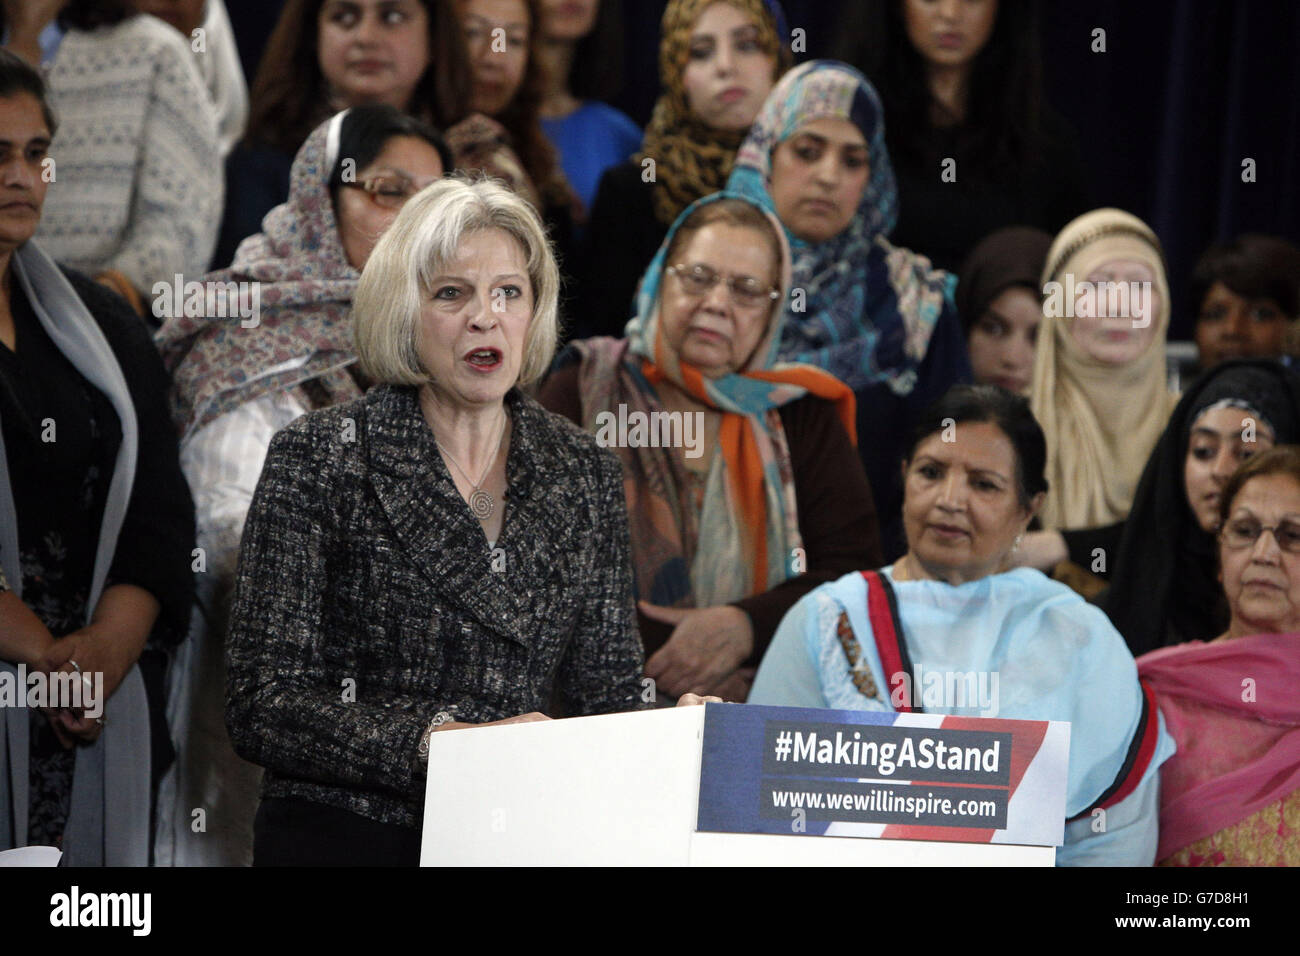 Home Secretary Theresa May speaks at the Making A Stand launch event in central London, the event which was organised by Inspire features Muslim women from across the UK who are making a united stand rejecting the barbarism of the Islamic State. Stock Photo